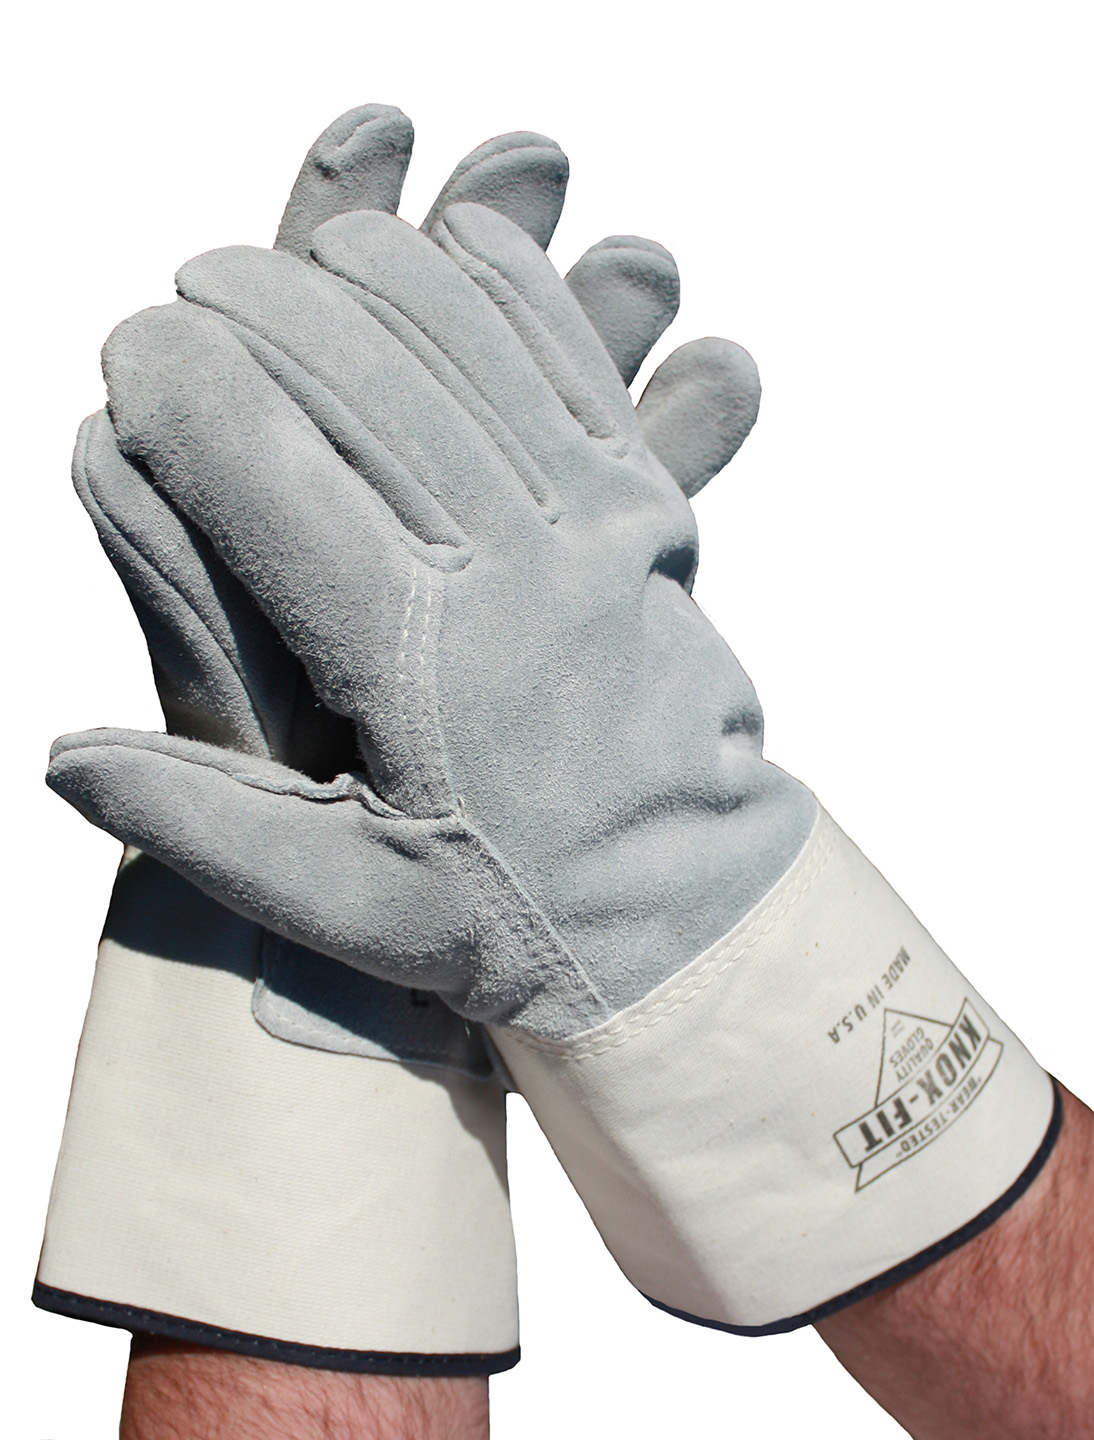 Knoxville leather palm glove